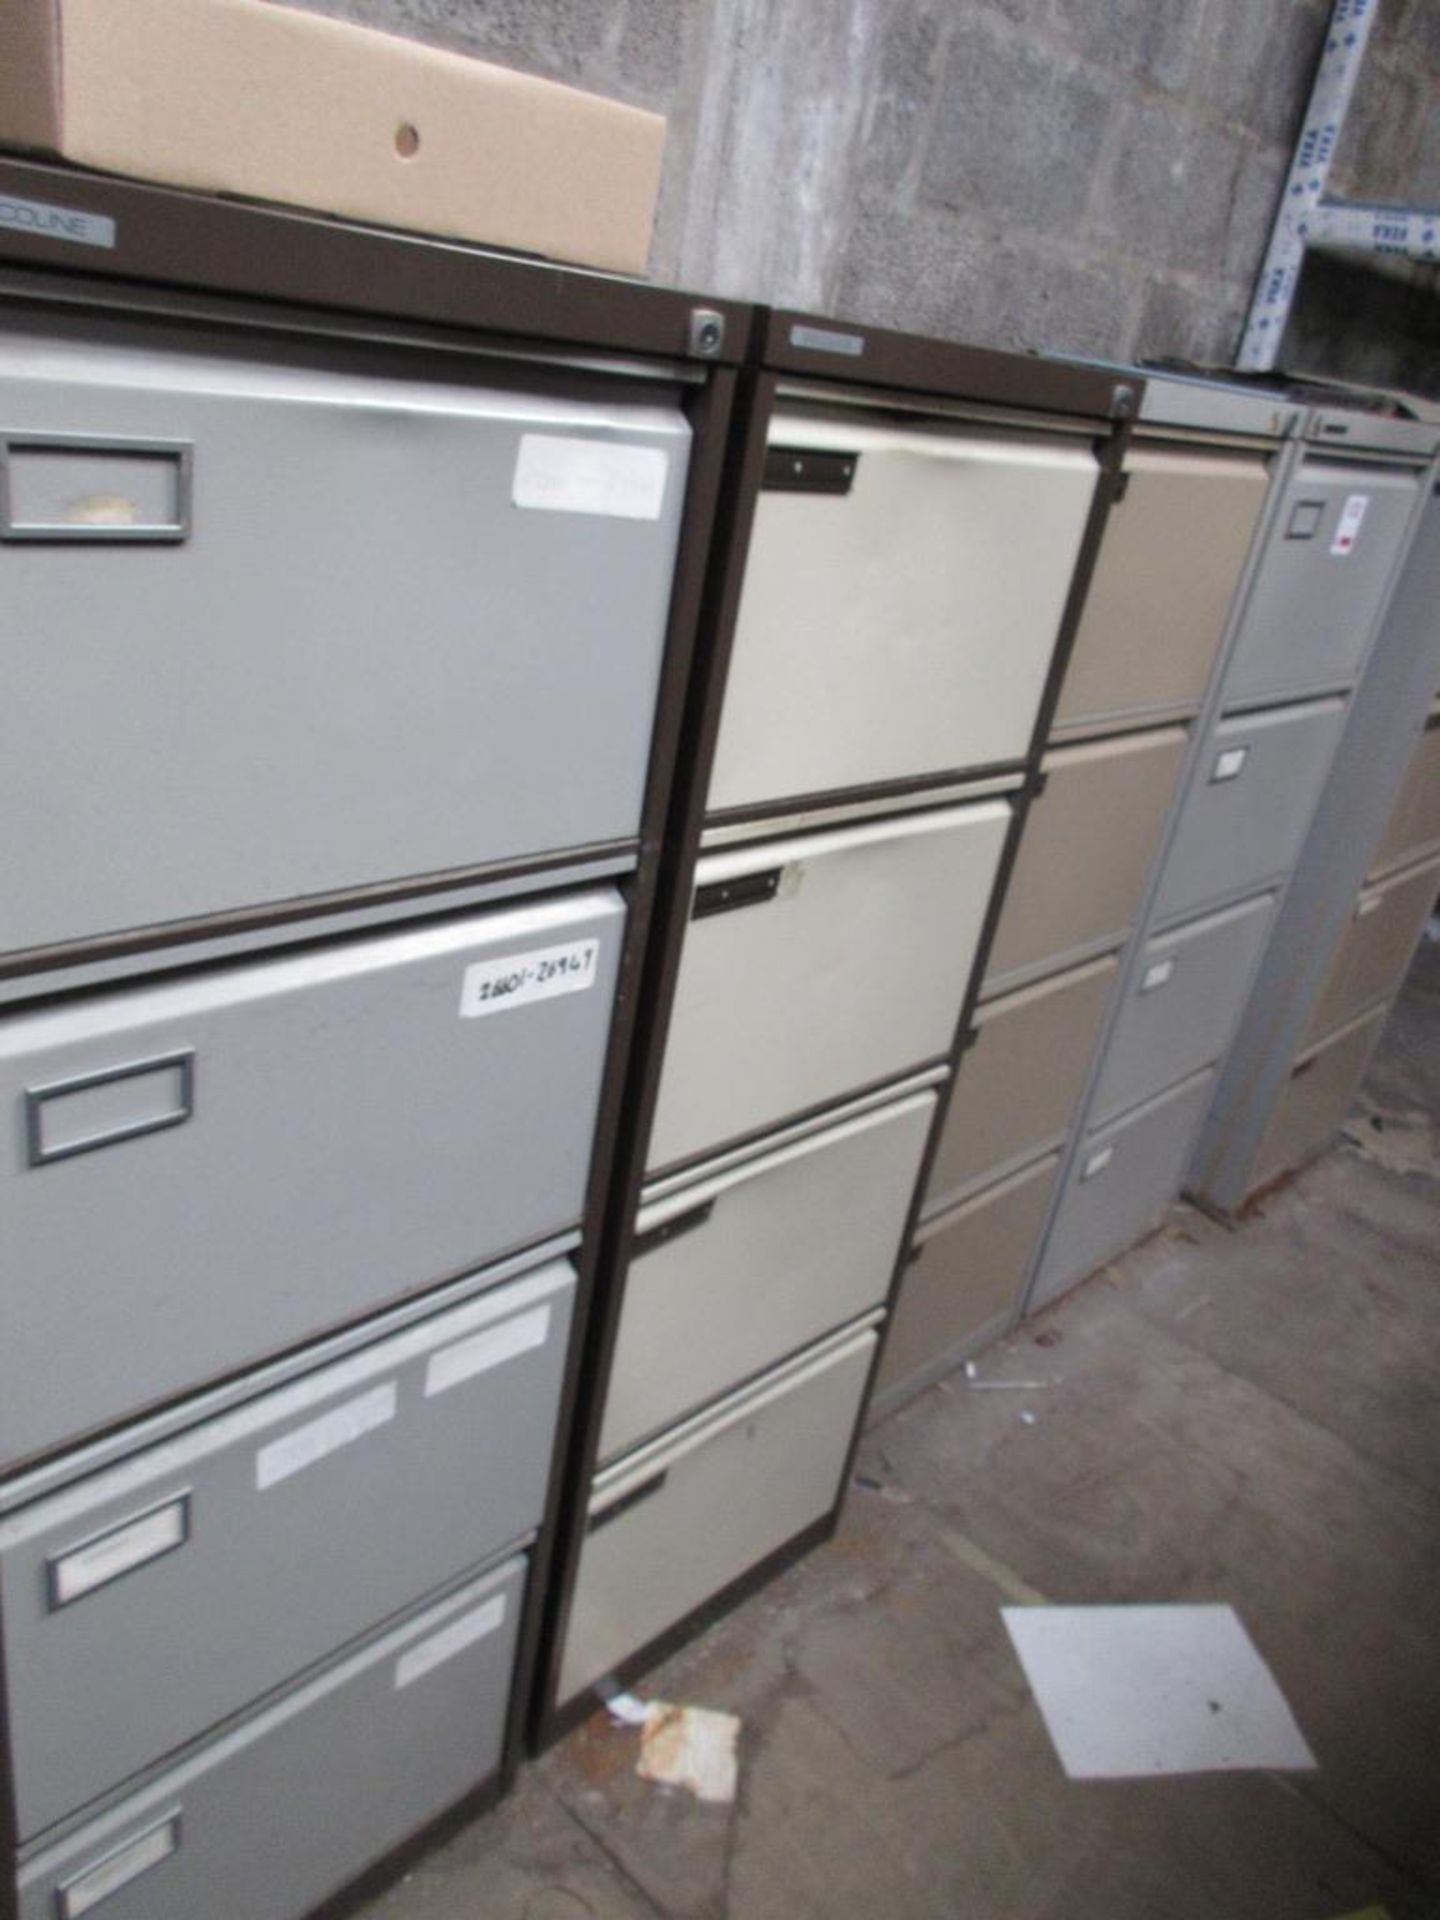 Four metal 4 drawer filing cabinets